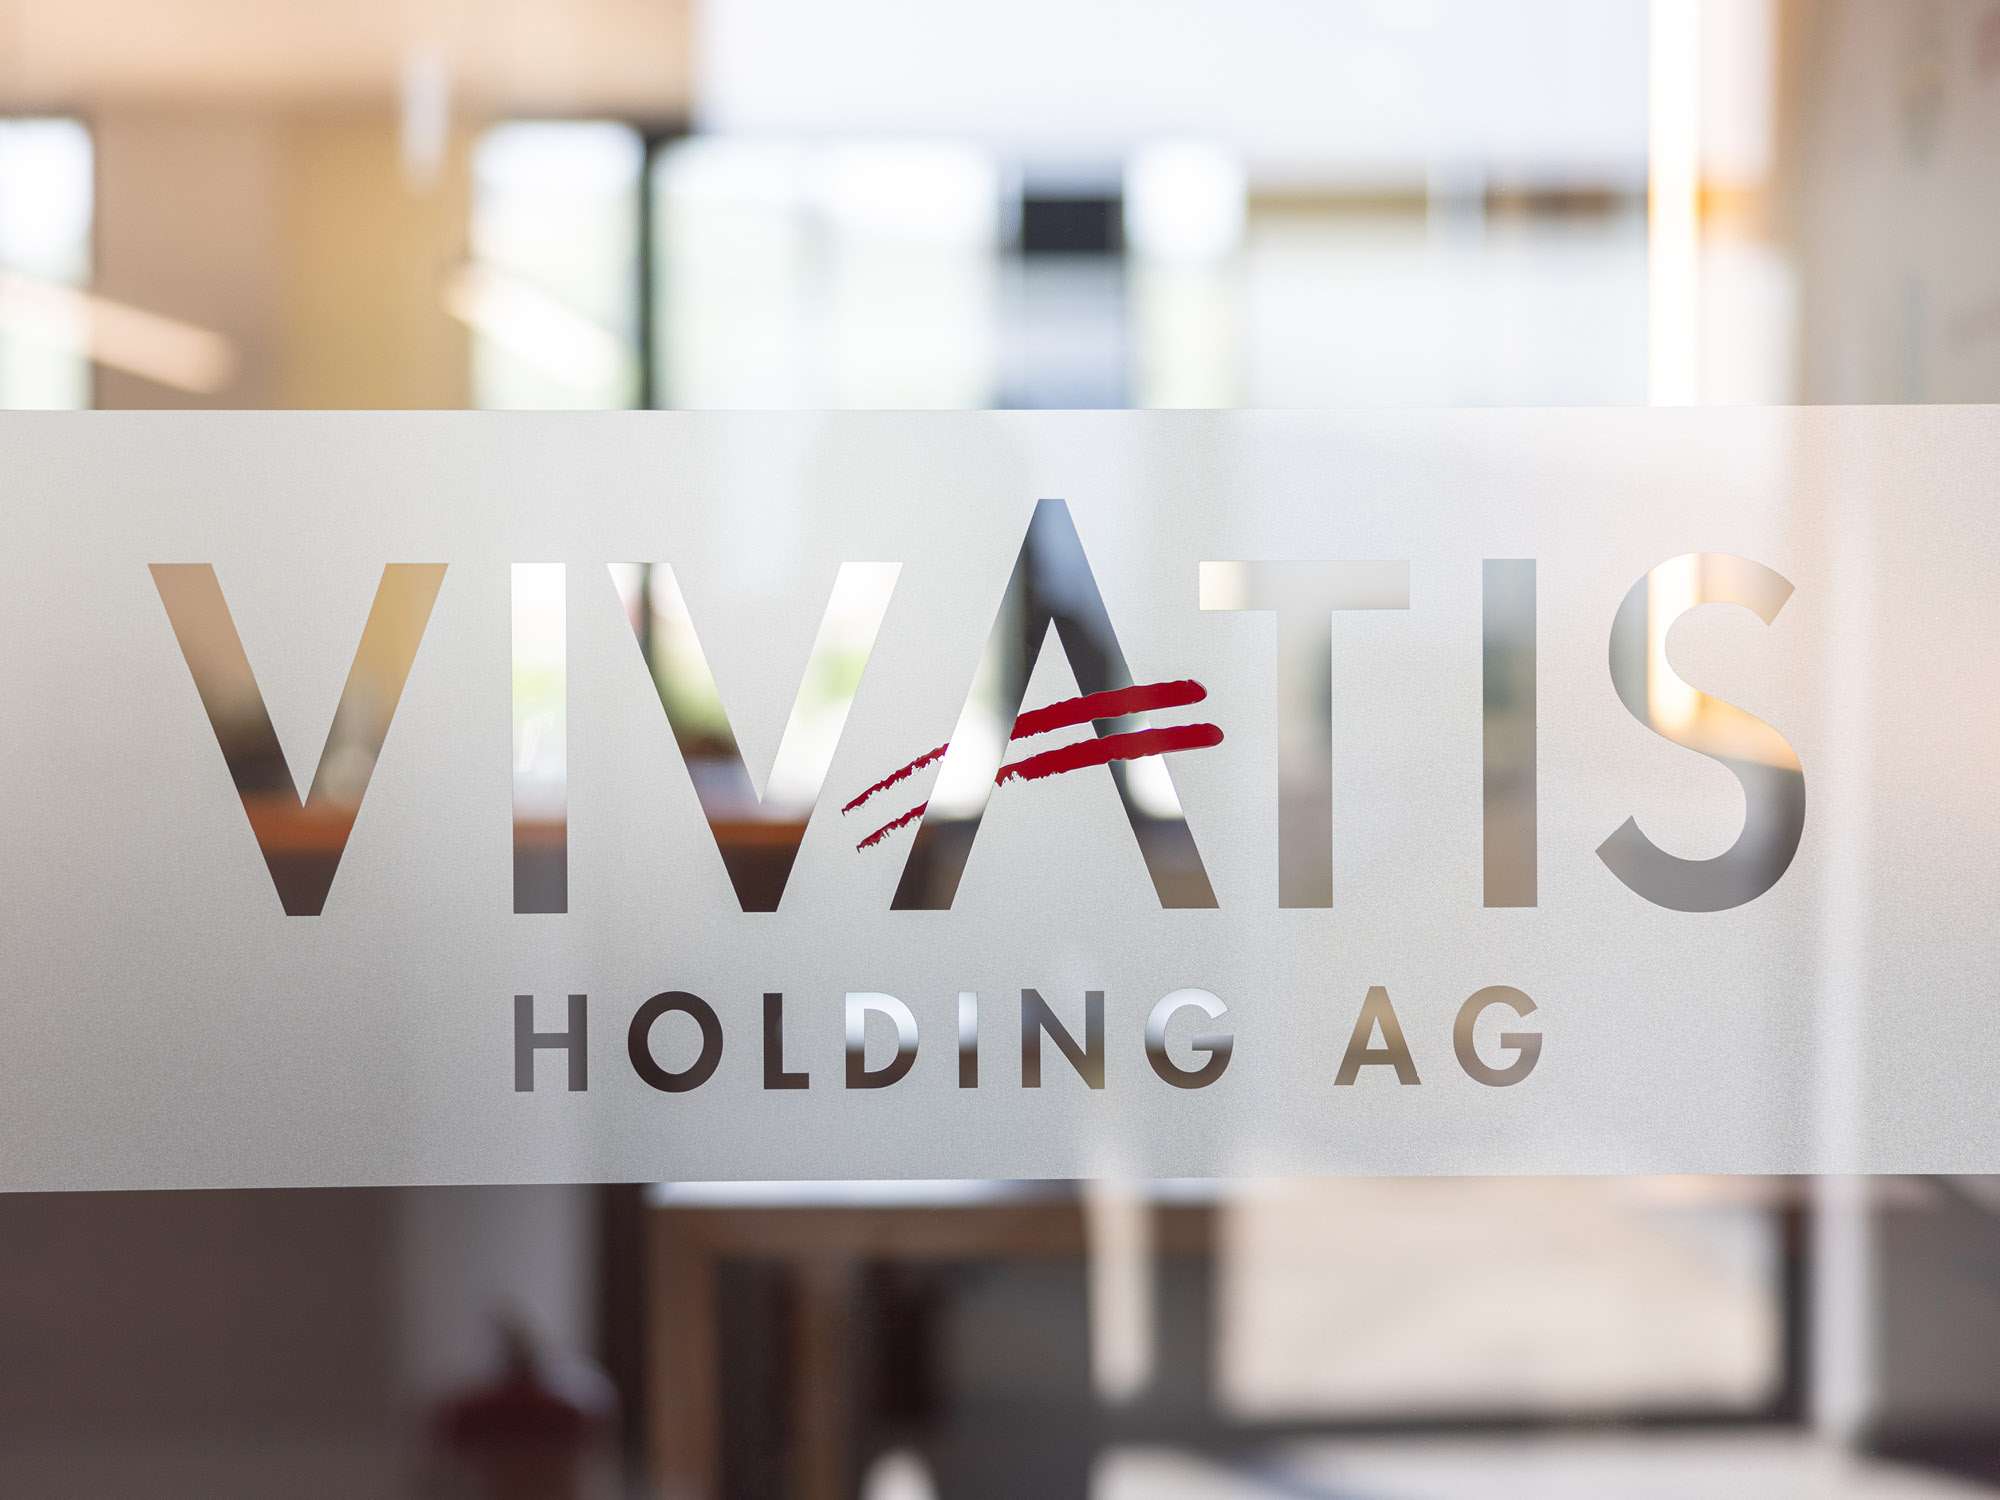 VIVATIS Holding AG – one of the leading Austrian companies in the food and beverage industry